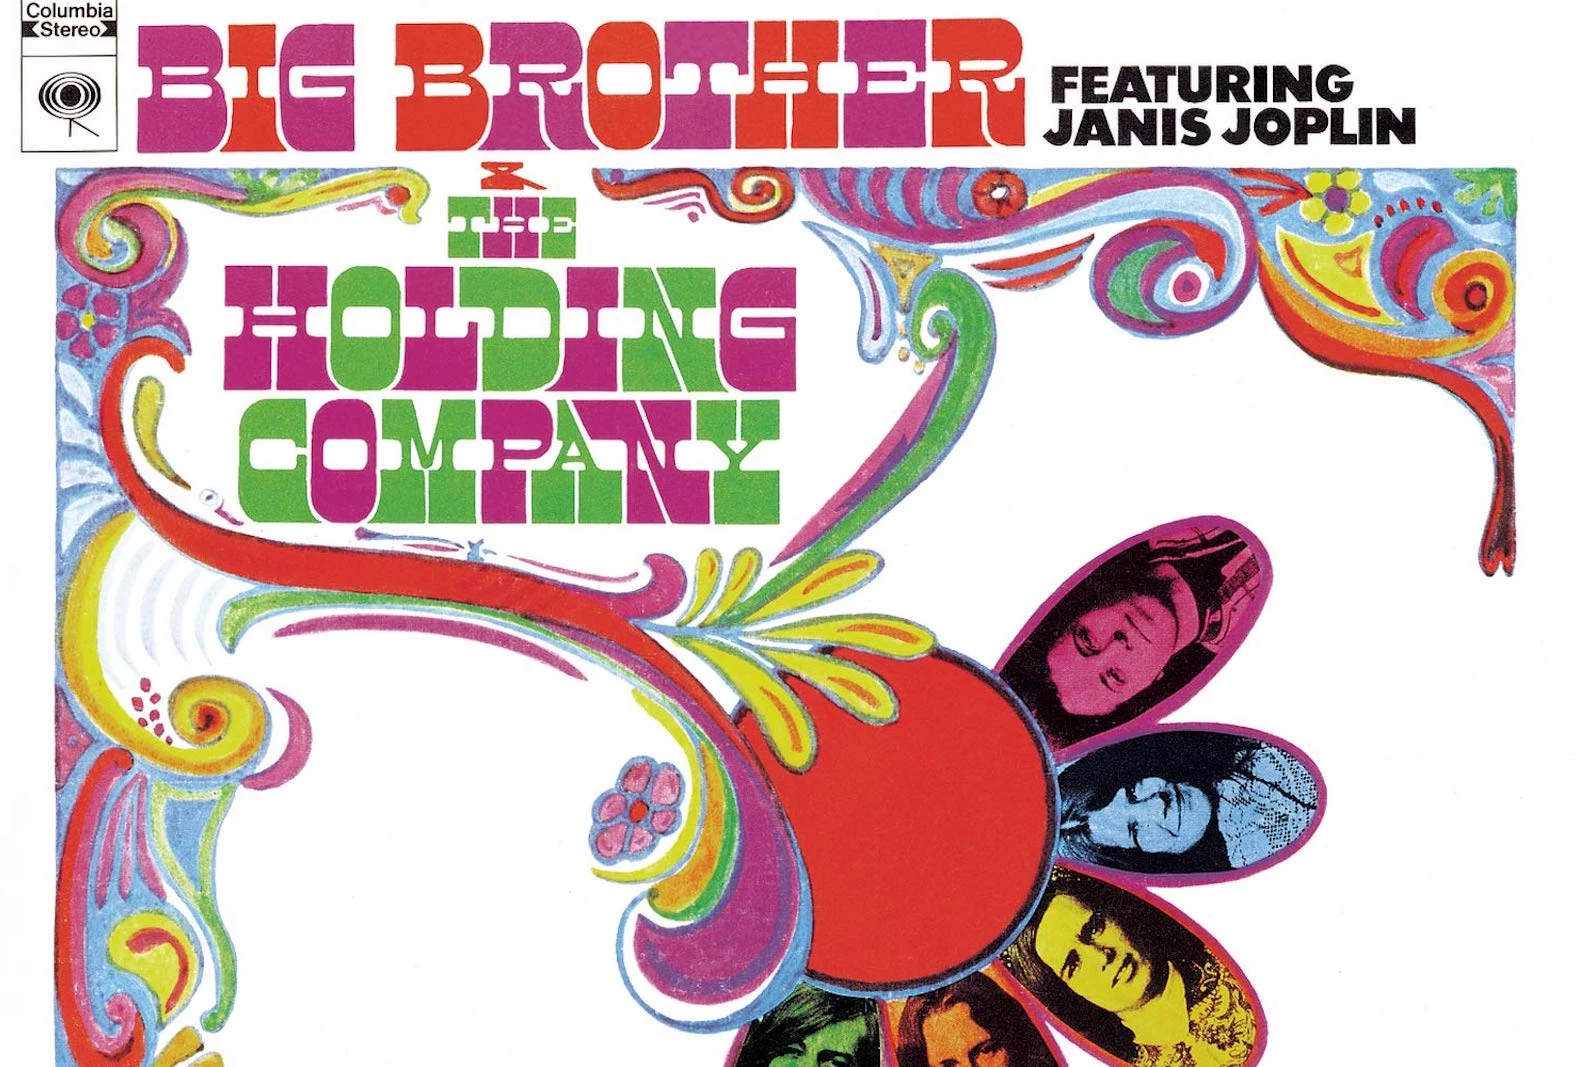 55 Years Ago: Big Brother and Holding Company Release Debut LP